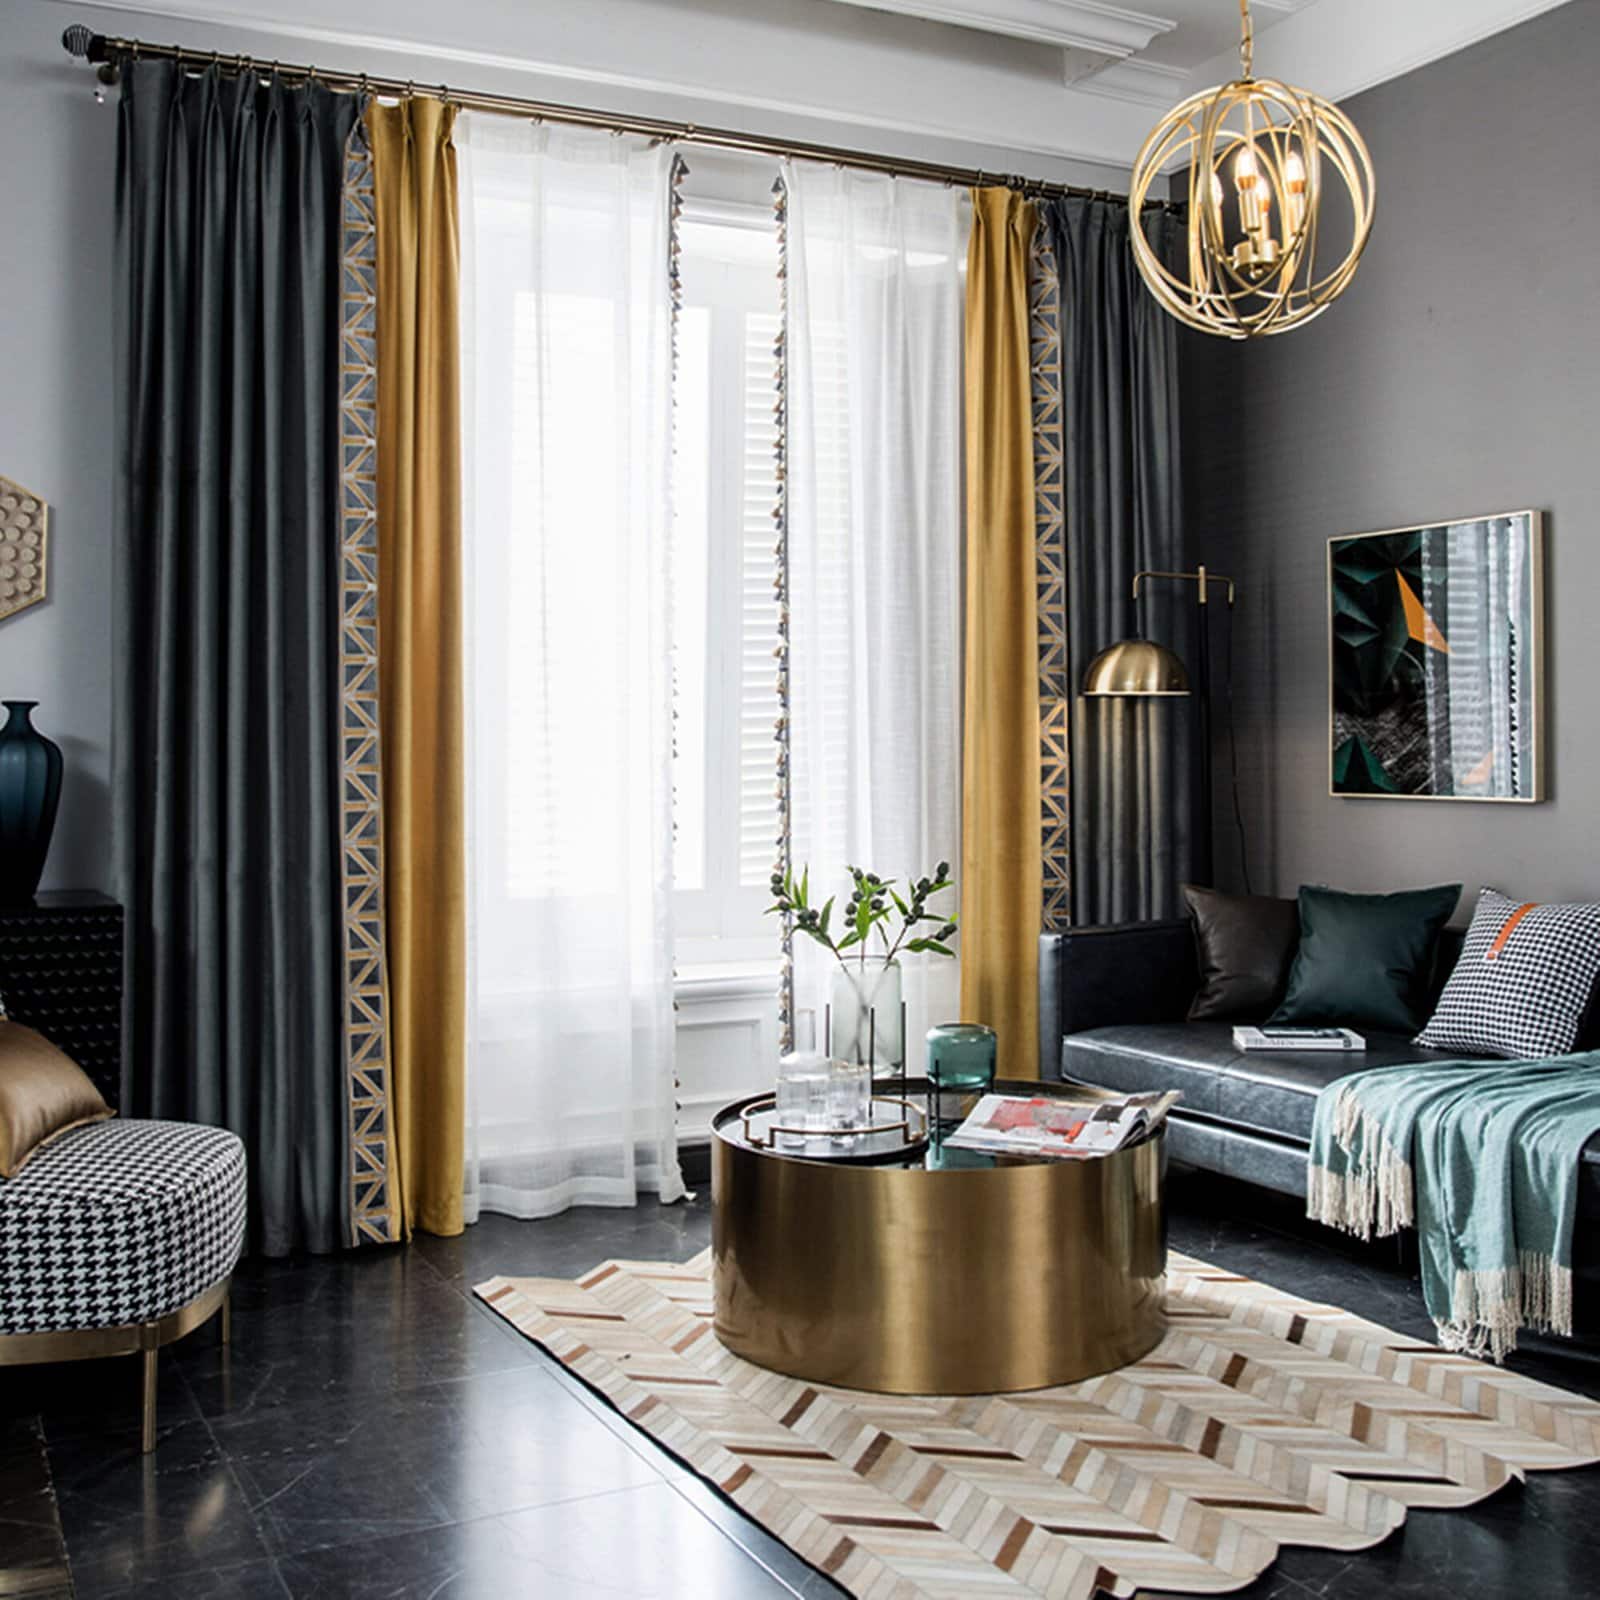 4. Add a Glam Touch to Your Room with Rich Velvet